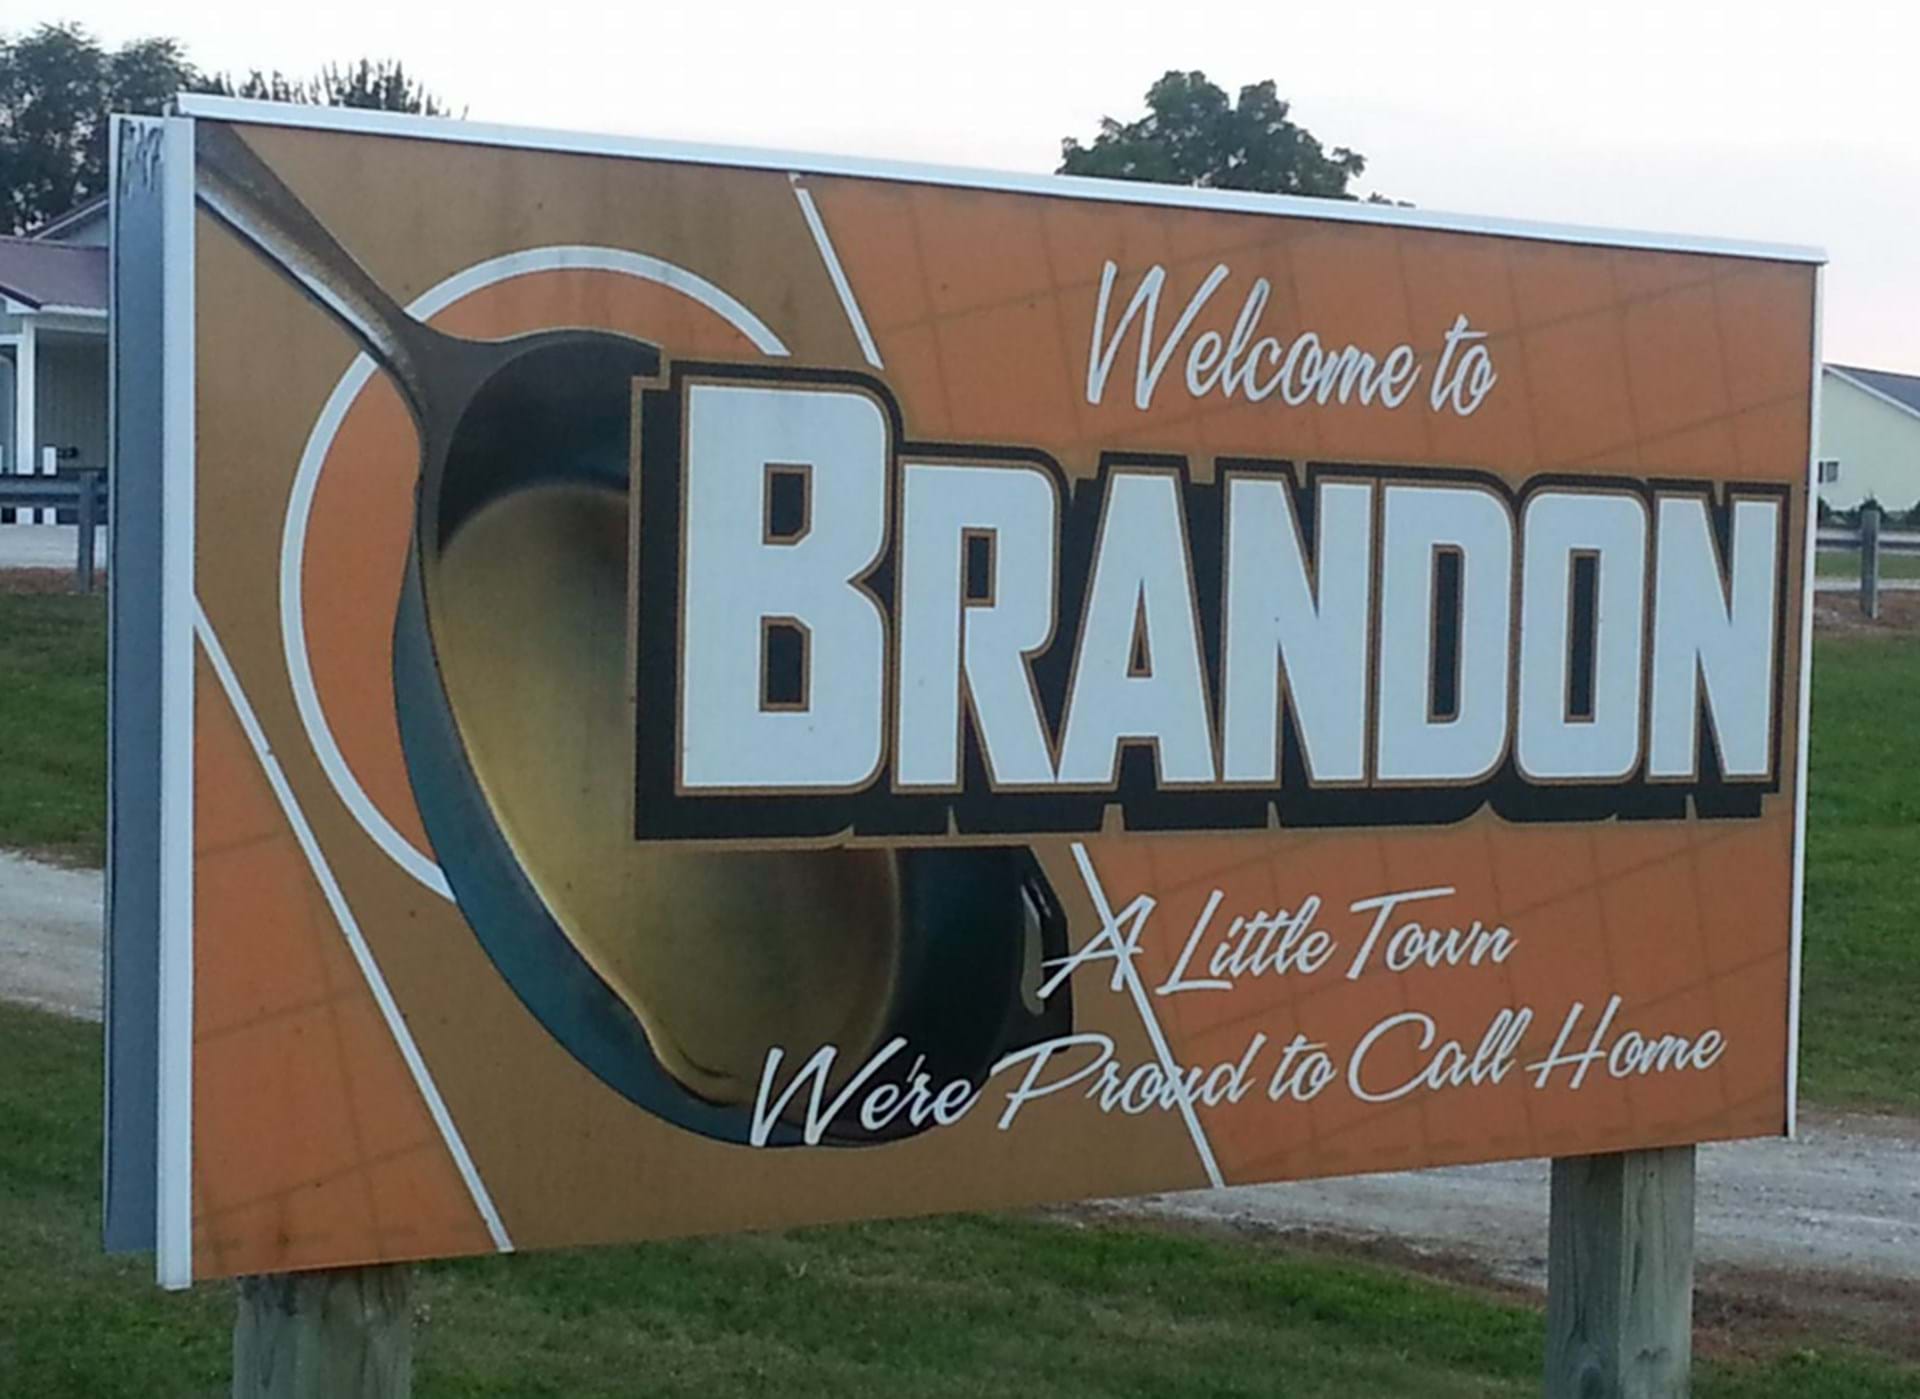 Brandon: A Little Town We're Proud to Call Home